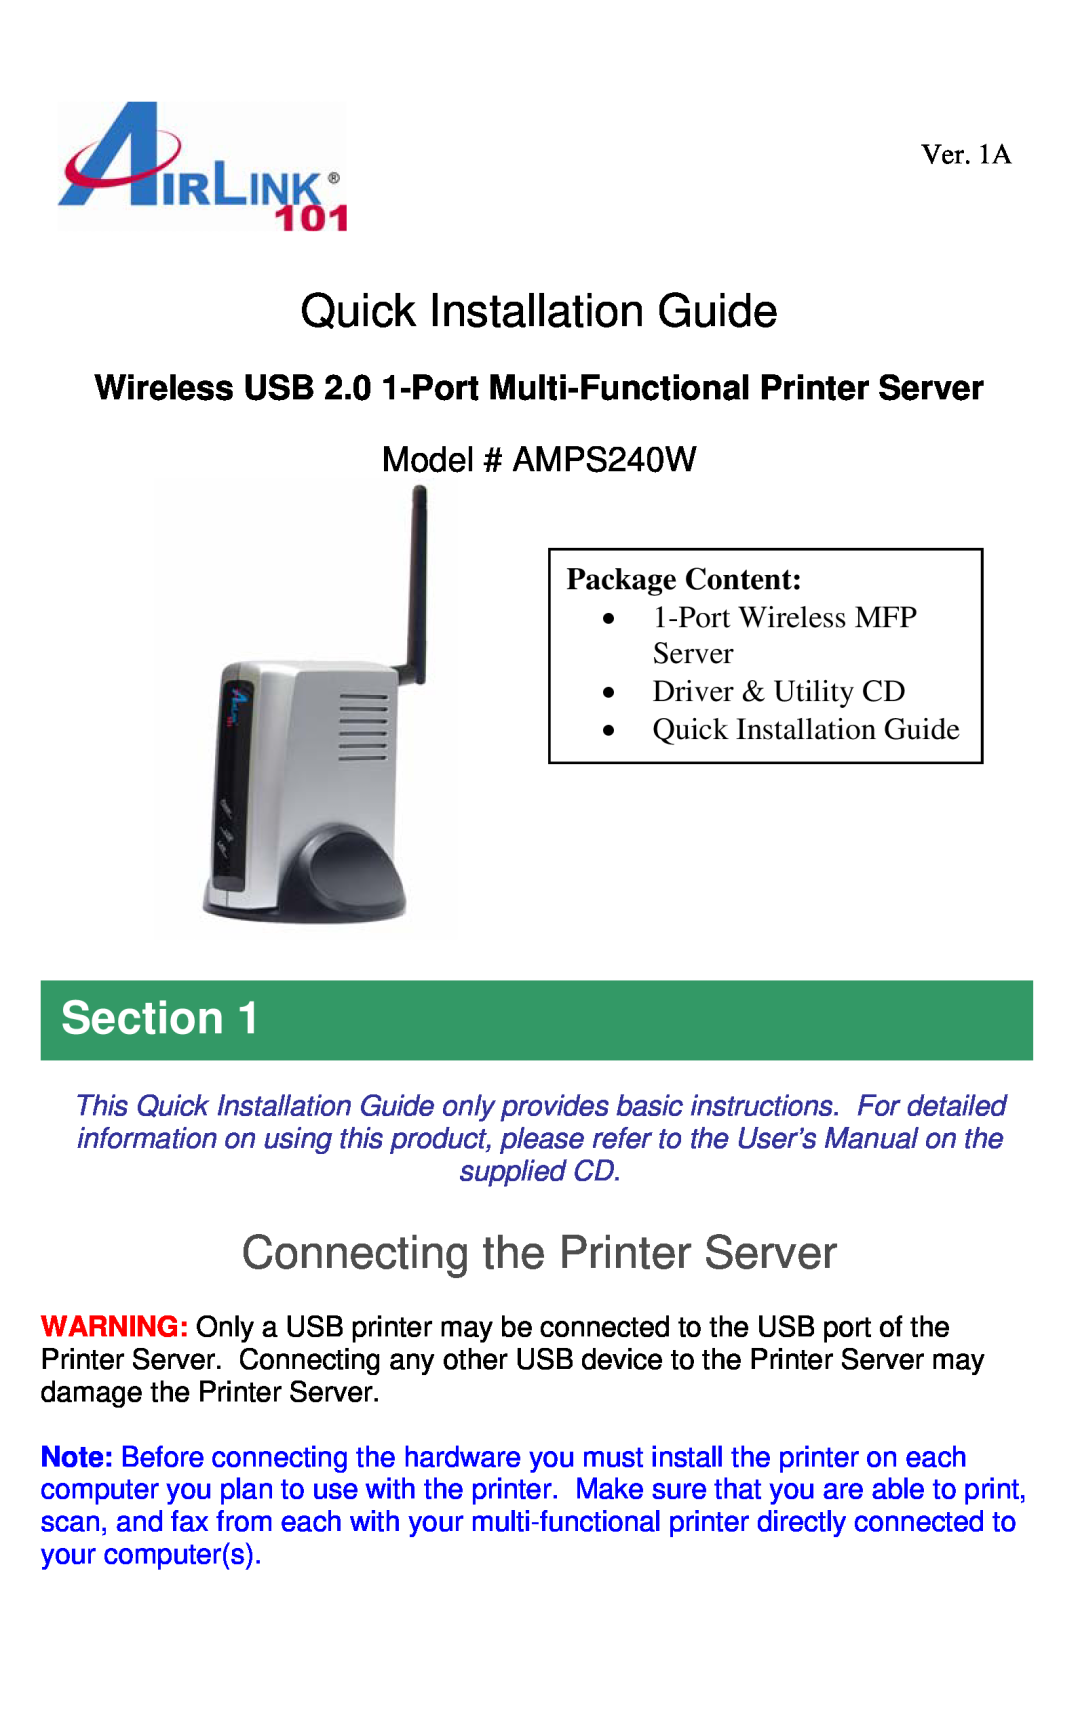 Airlink101 user manual Section, Connecting the Printer Server, Quick Installation Guide, Model # AMPS240W 